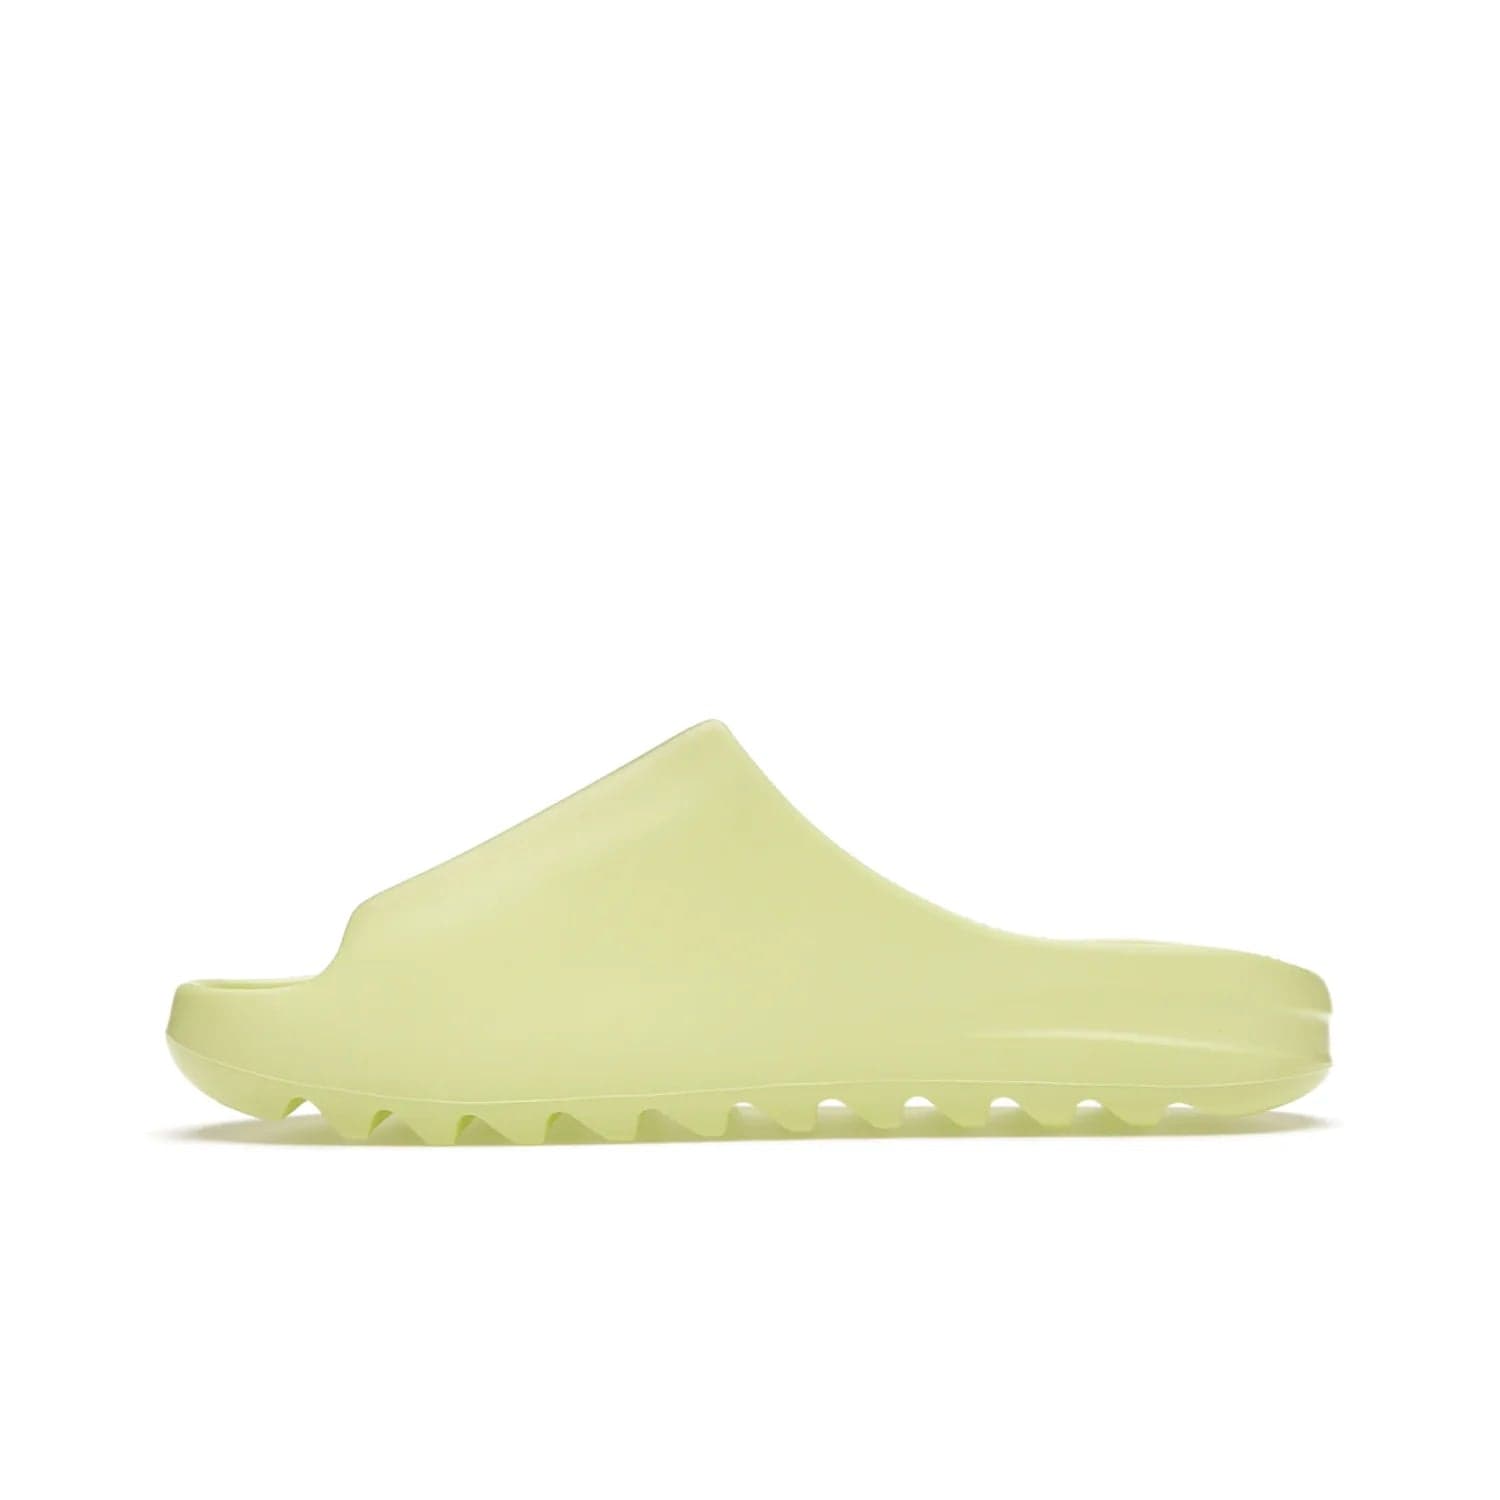 adidas Yeezy Slide Glow Green - Image 19 - Only at www.BallersClubKickz.com - Experience an unexpected summer style with the adidas Yeezy Slide Glow Green. This limited edition slide sandal provides a lightweight and durable construction and a bold Glow Green hue. Strategic grooves enhance traction and provide all-day comfort. Make a statement with the adidas Yeezy Slide Glow Green.